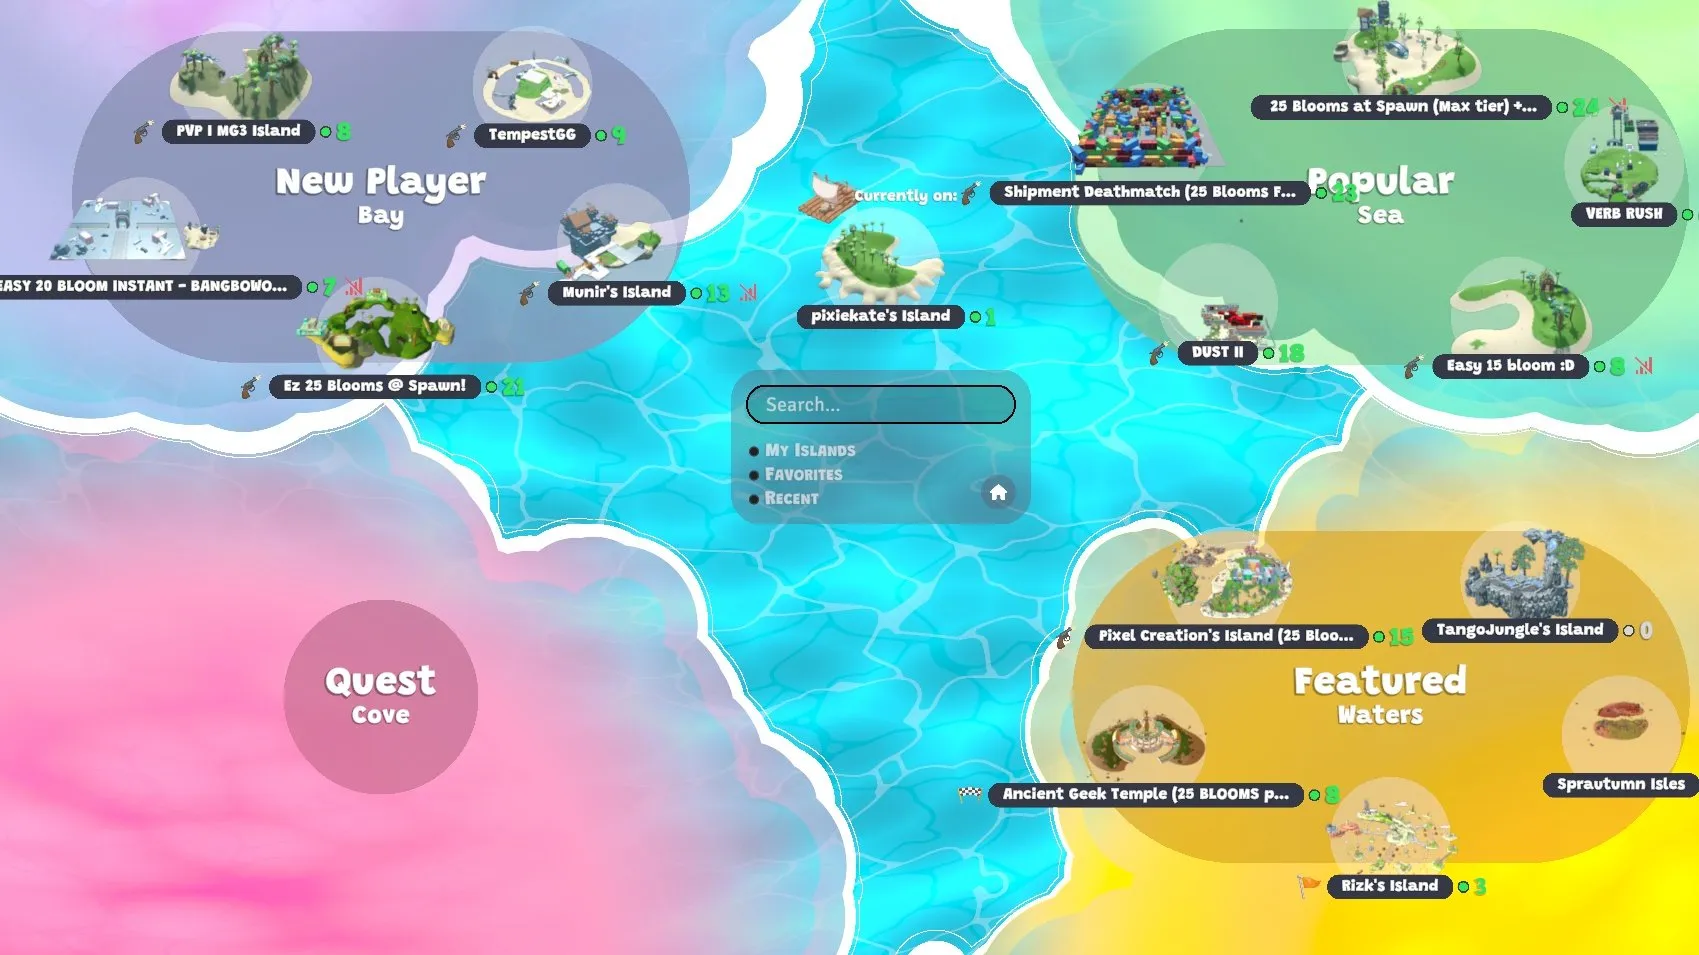 Game screenshot showing a map with popular islands, "featured" island, and islands geared toward new players.